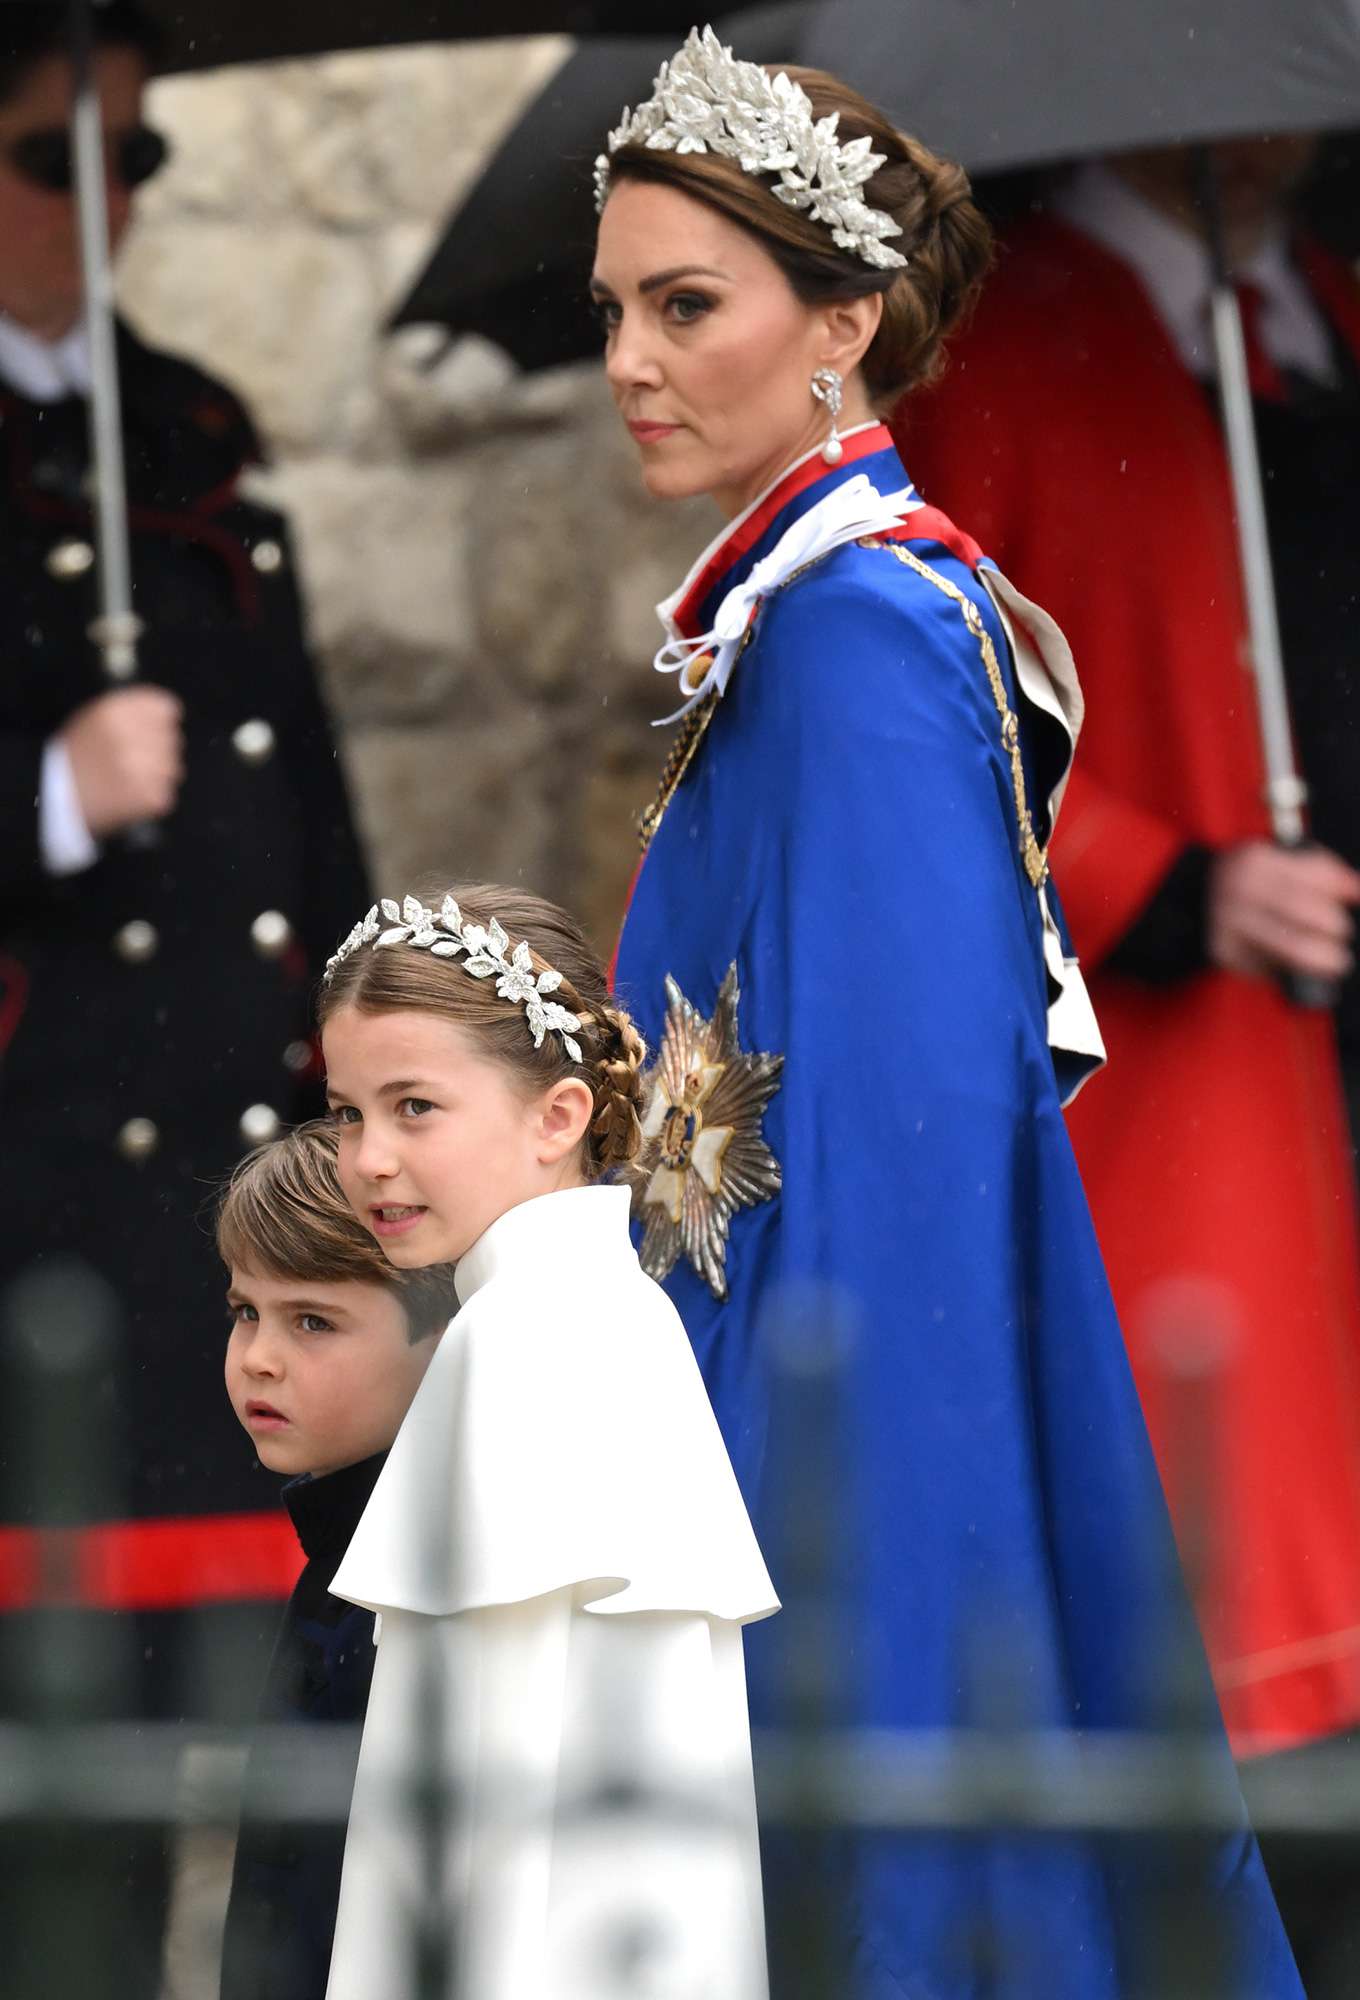 Catherine, Princess of Wales, Prince Louis and Princess Charlotte arrive at Westminster Abbey for the Coronation of King Charles III